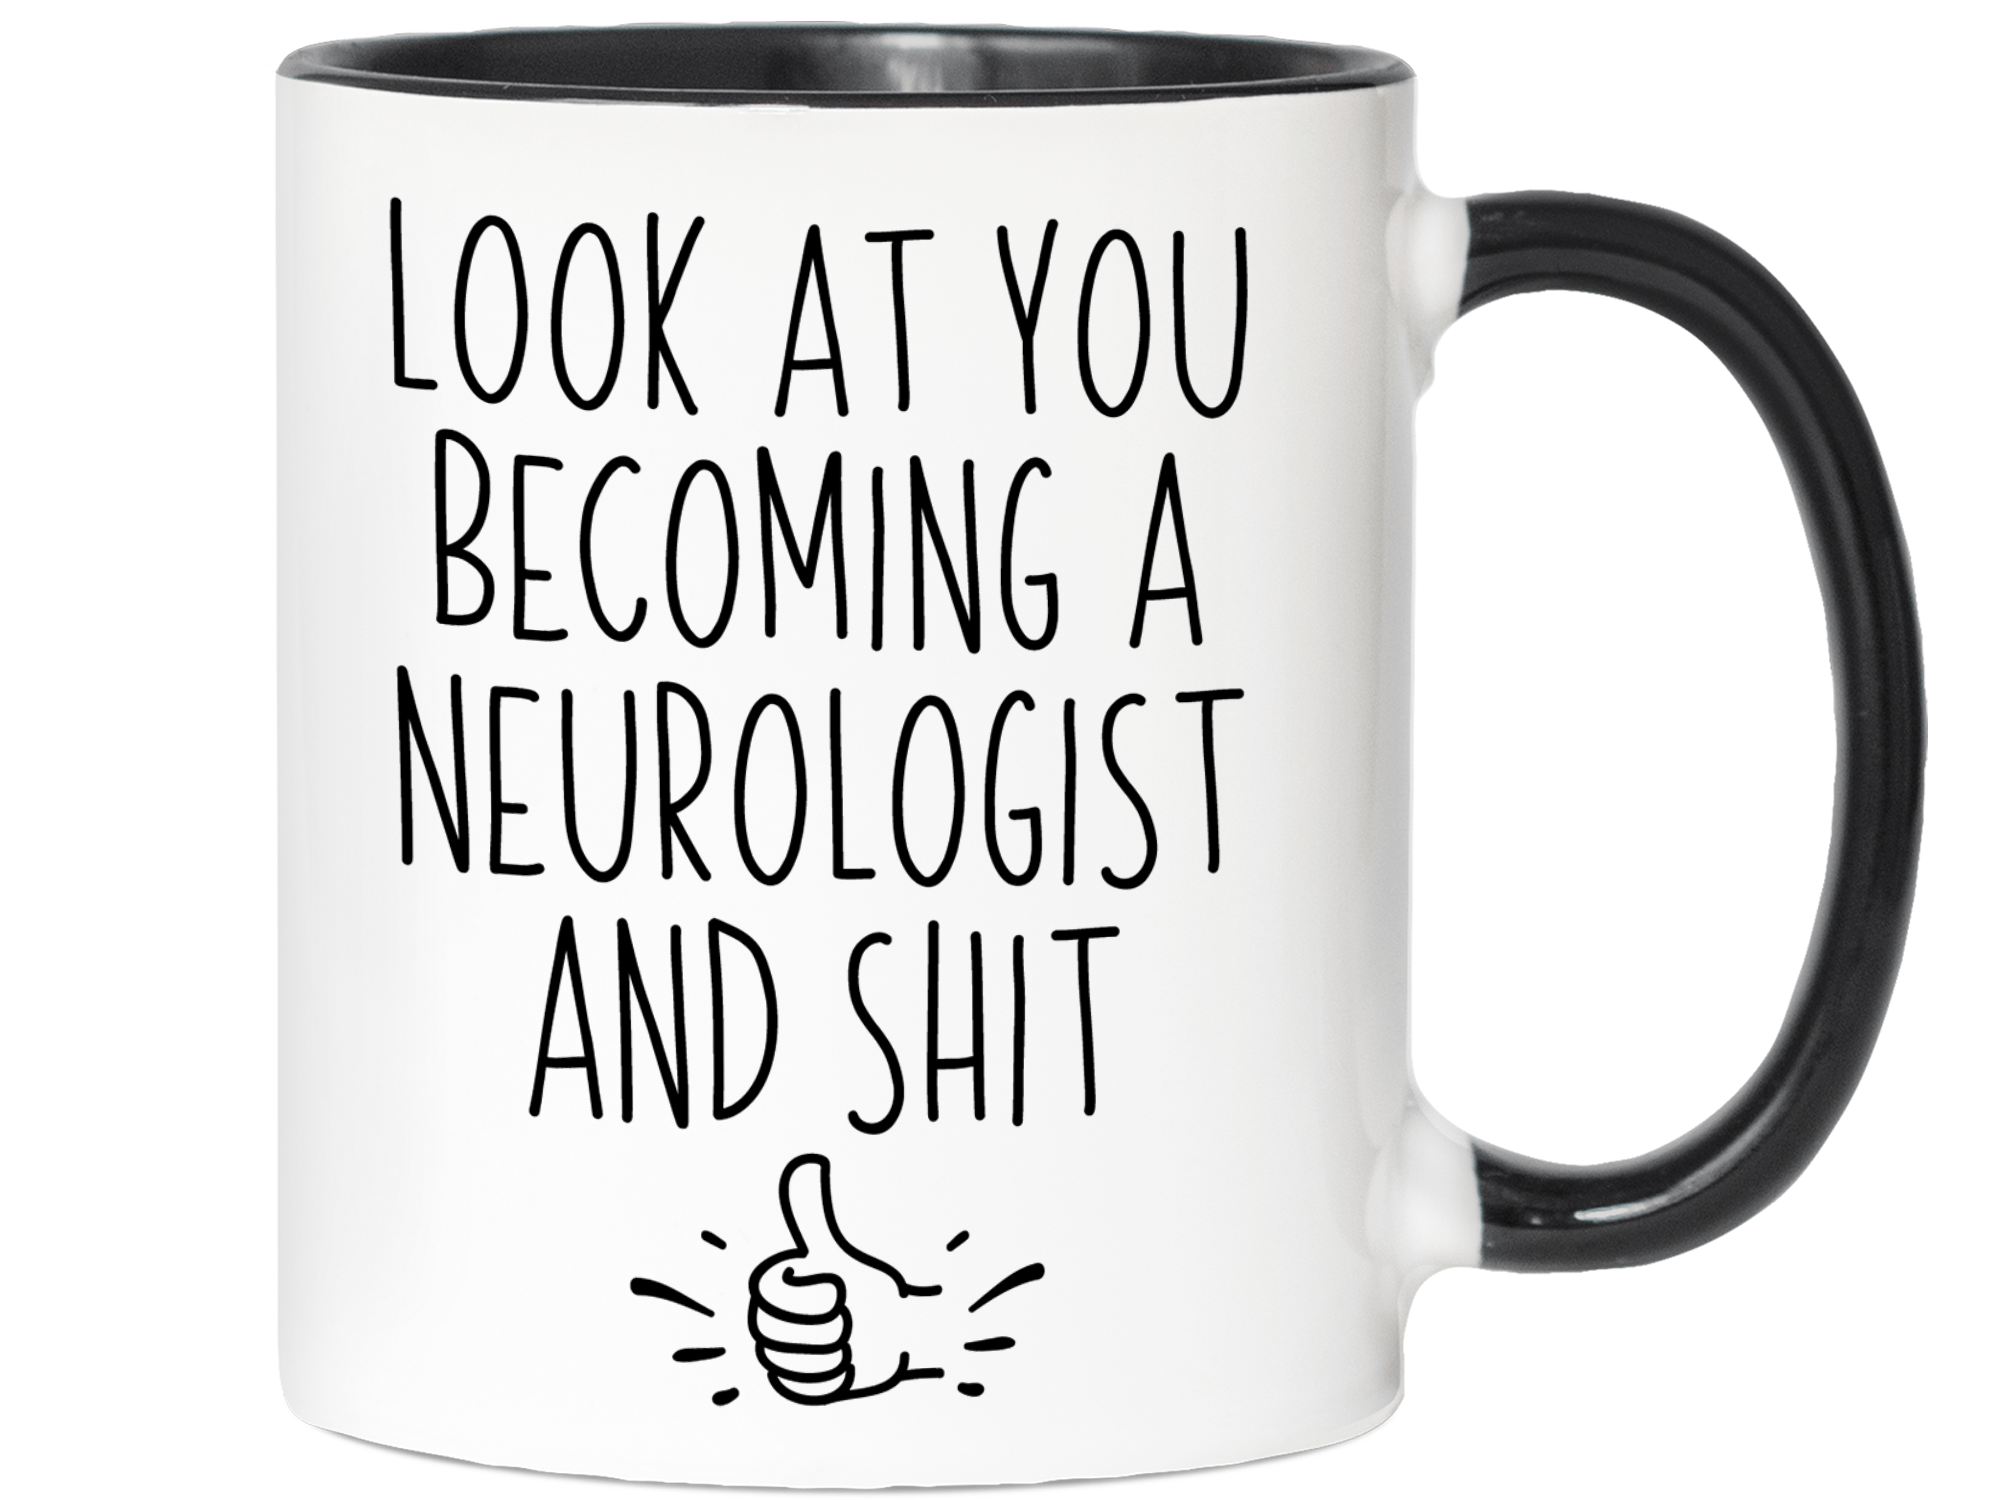 Graduation Gifts for Neurologists - Look at You Becoming a Neurologist and Shit Funny Coffee Mug